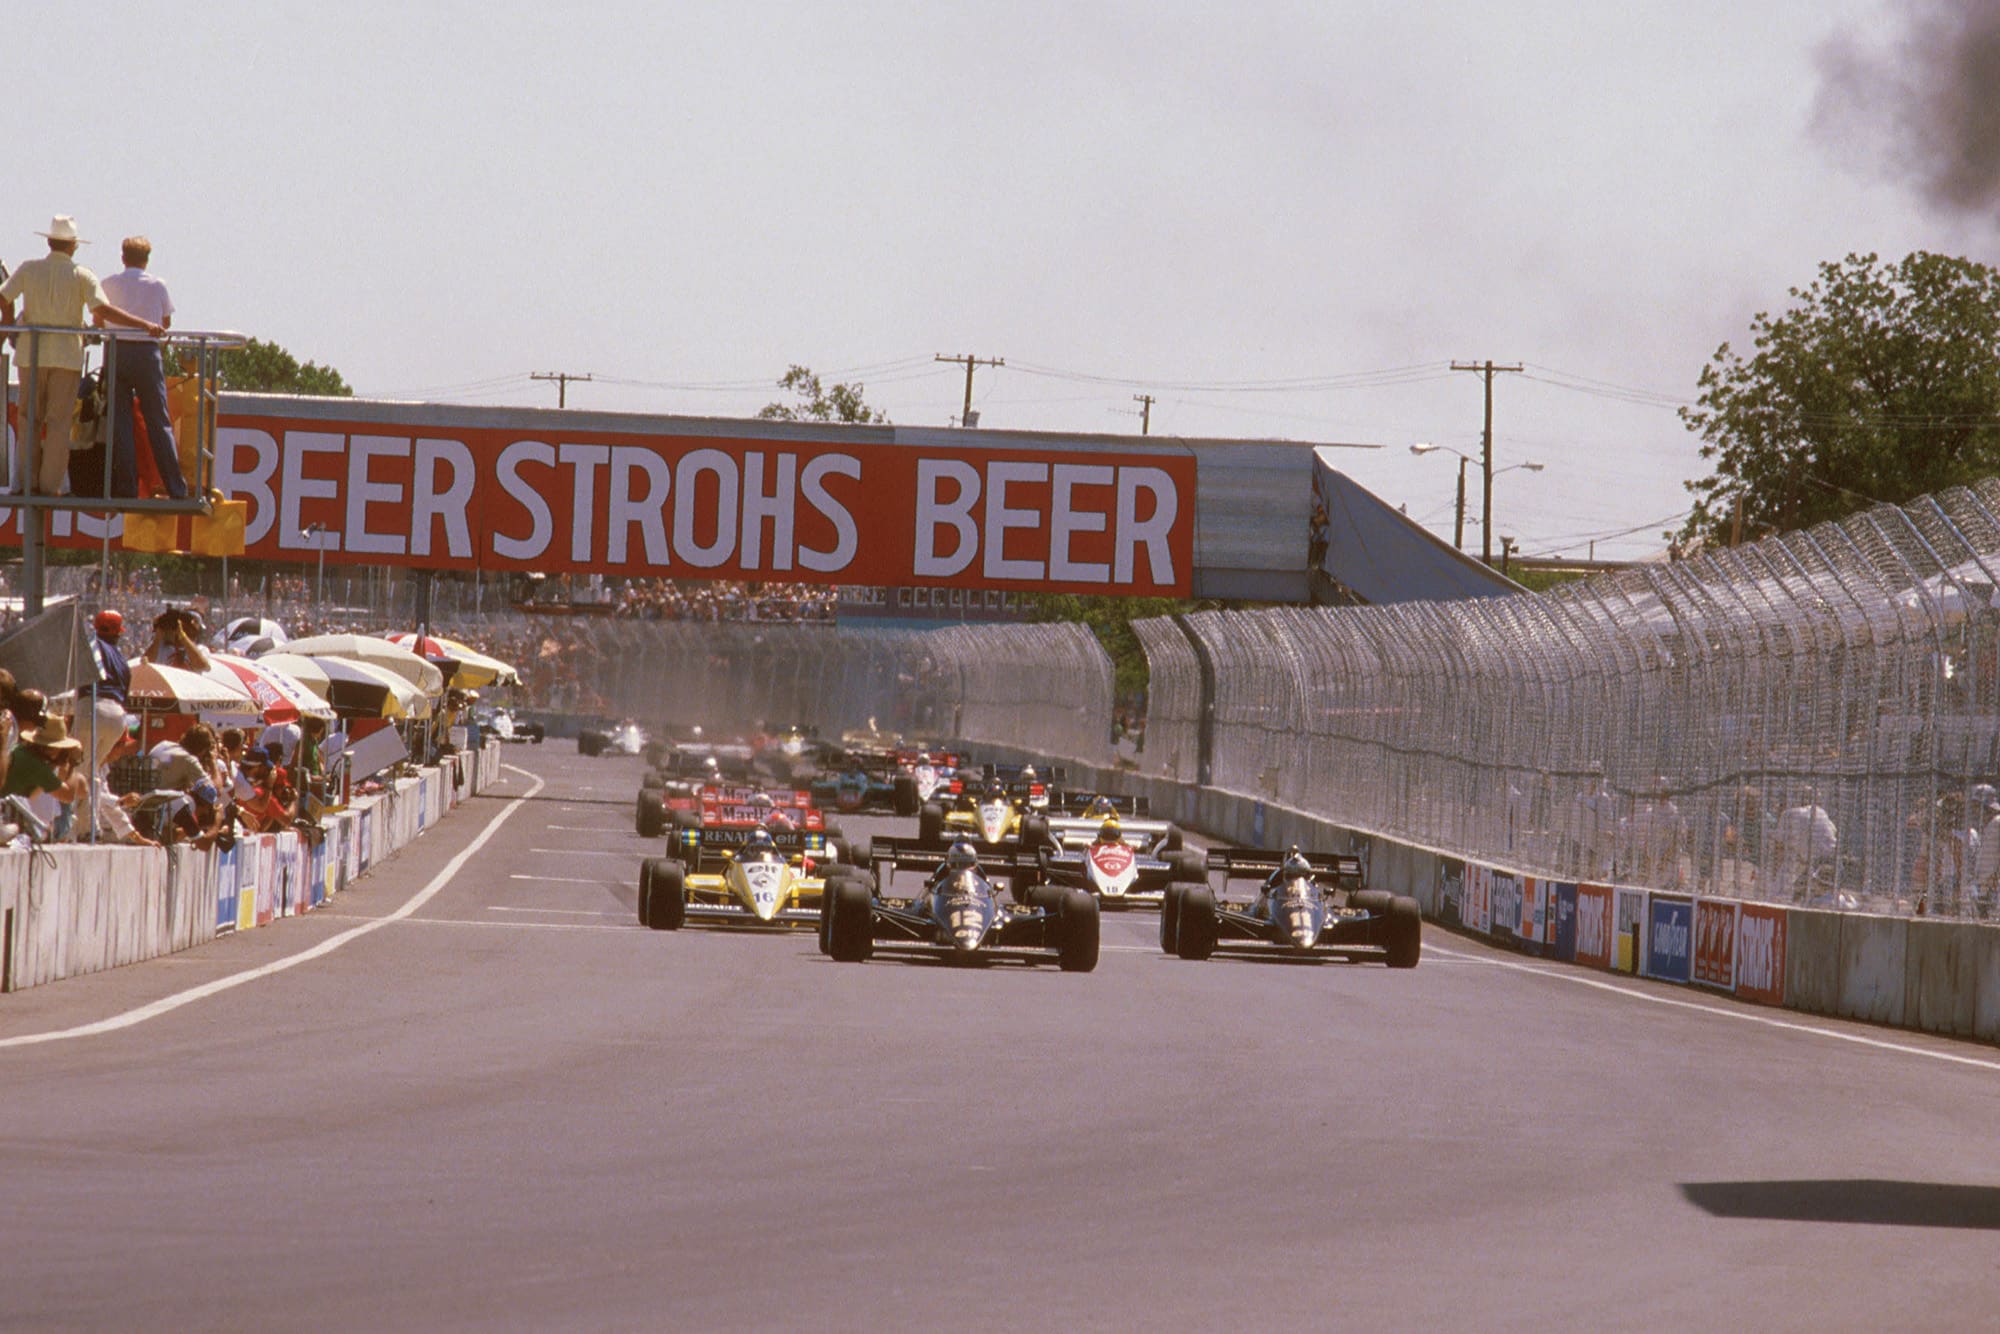 “In Formula 1, it’s not only the engines that whine” the 1984 Dallas